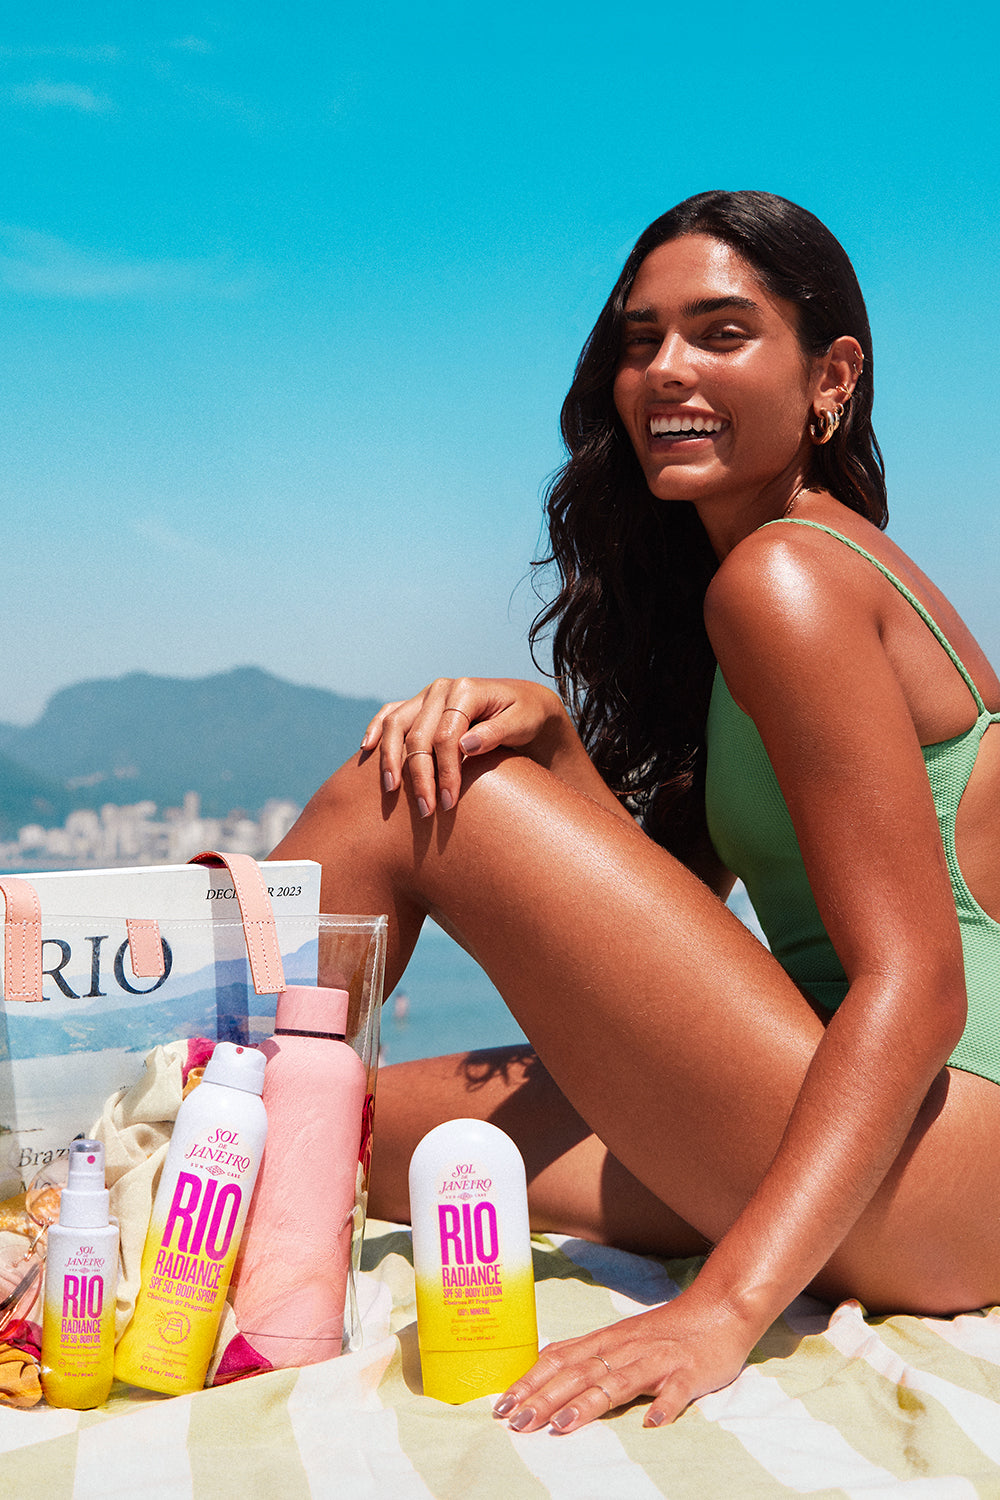 Introducing the Rio Radiance™ SPF 50 Collection 